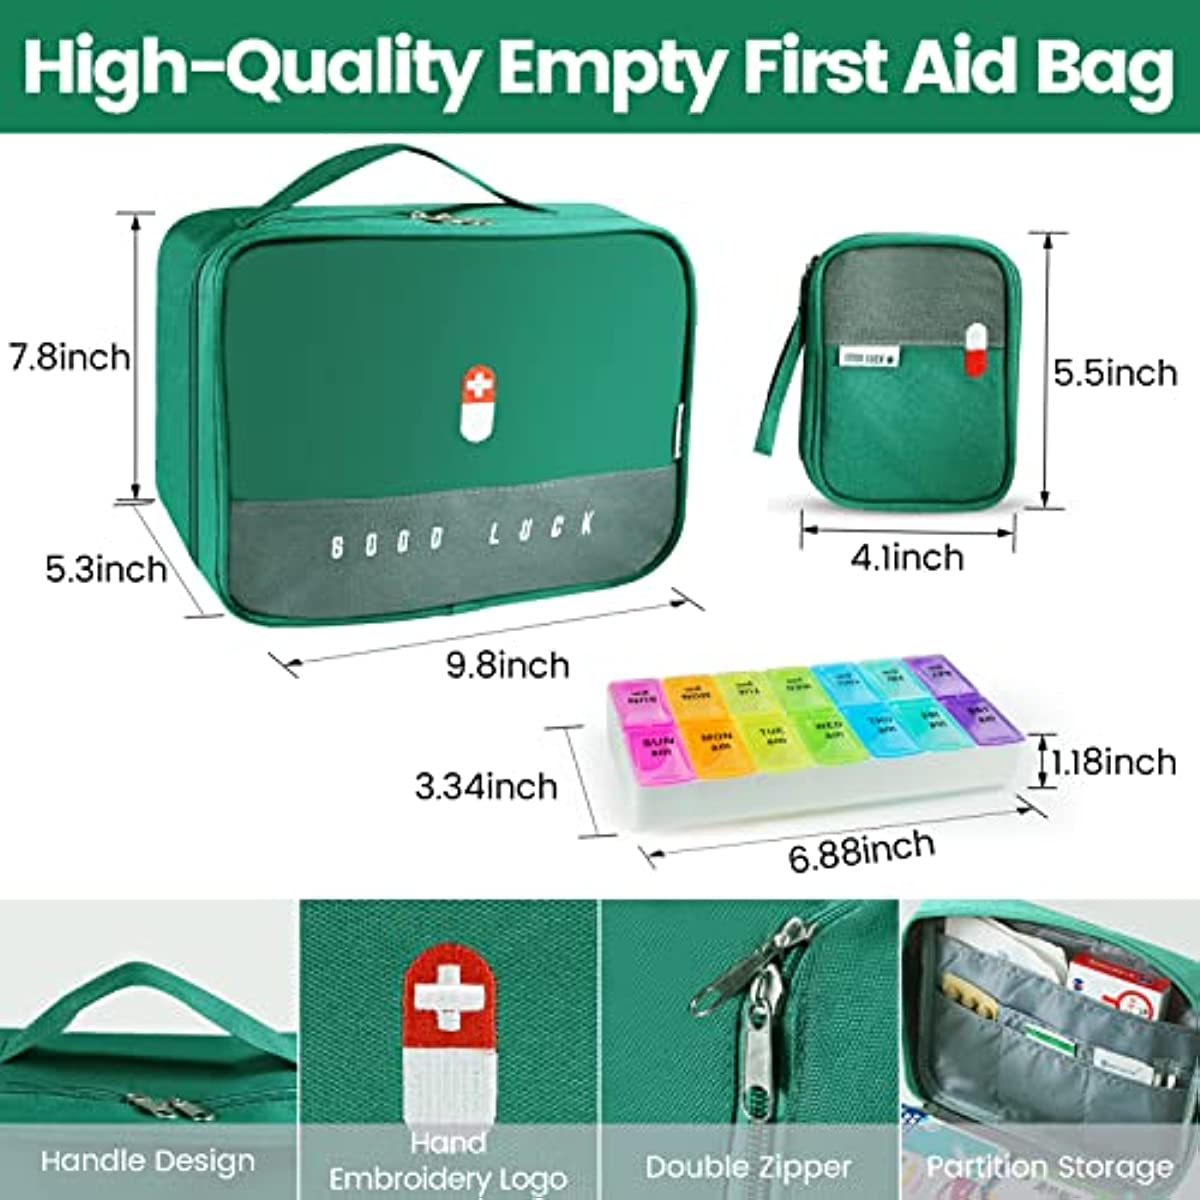 Empty First Aid Bags - Travel Medicine Organizer Bag, Mini Pouch Medical Supplies Bag for Family Outdoors Hiking Camping Car Office (Green)